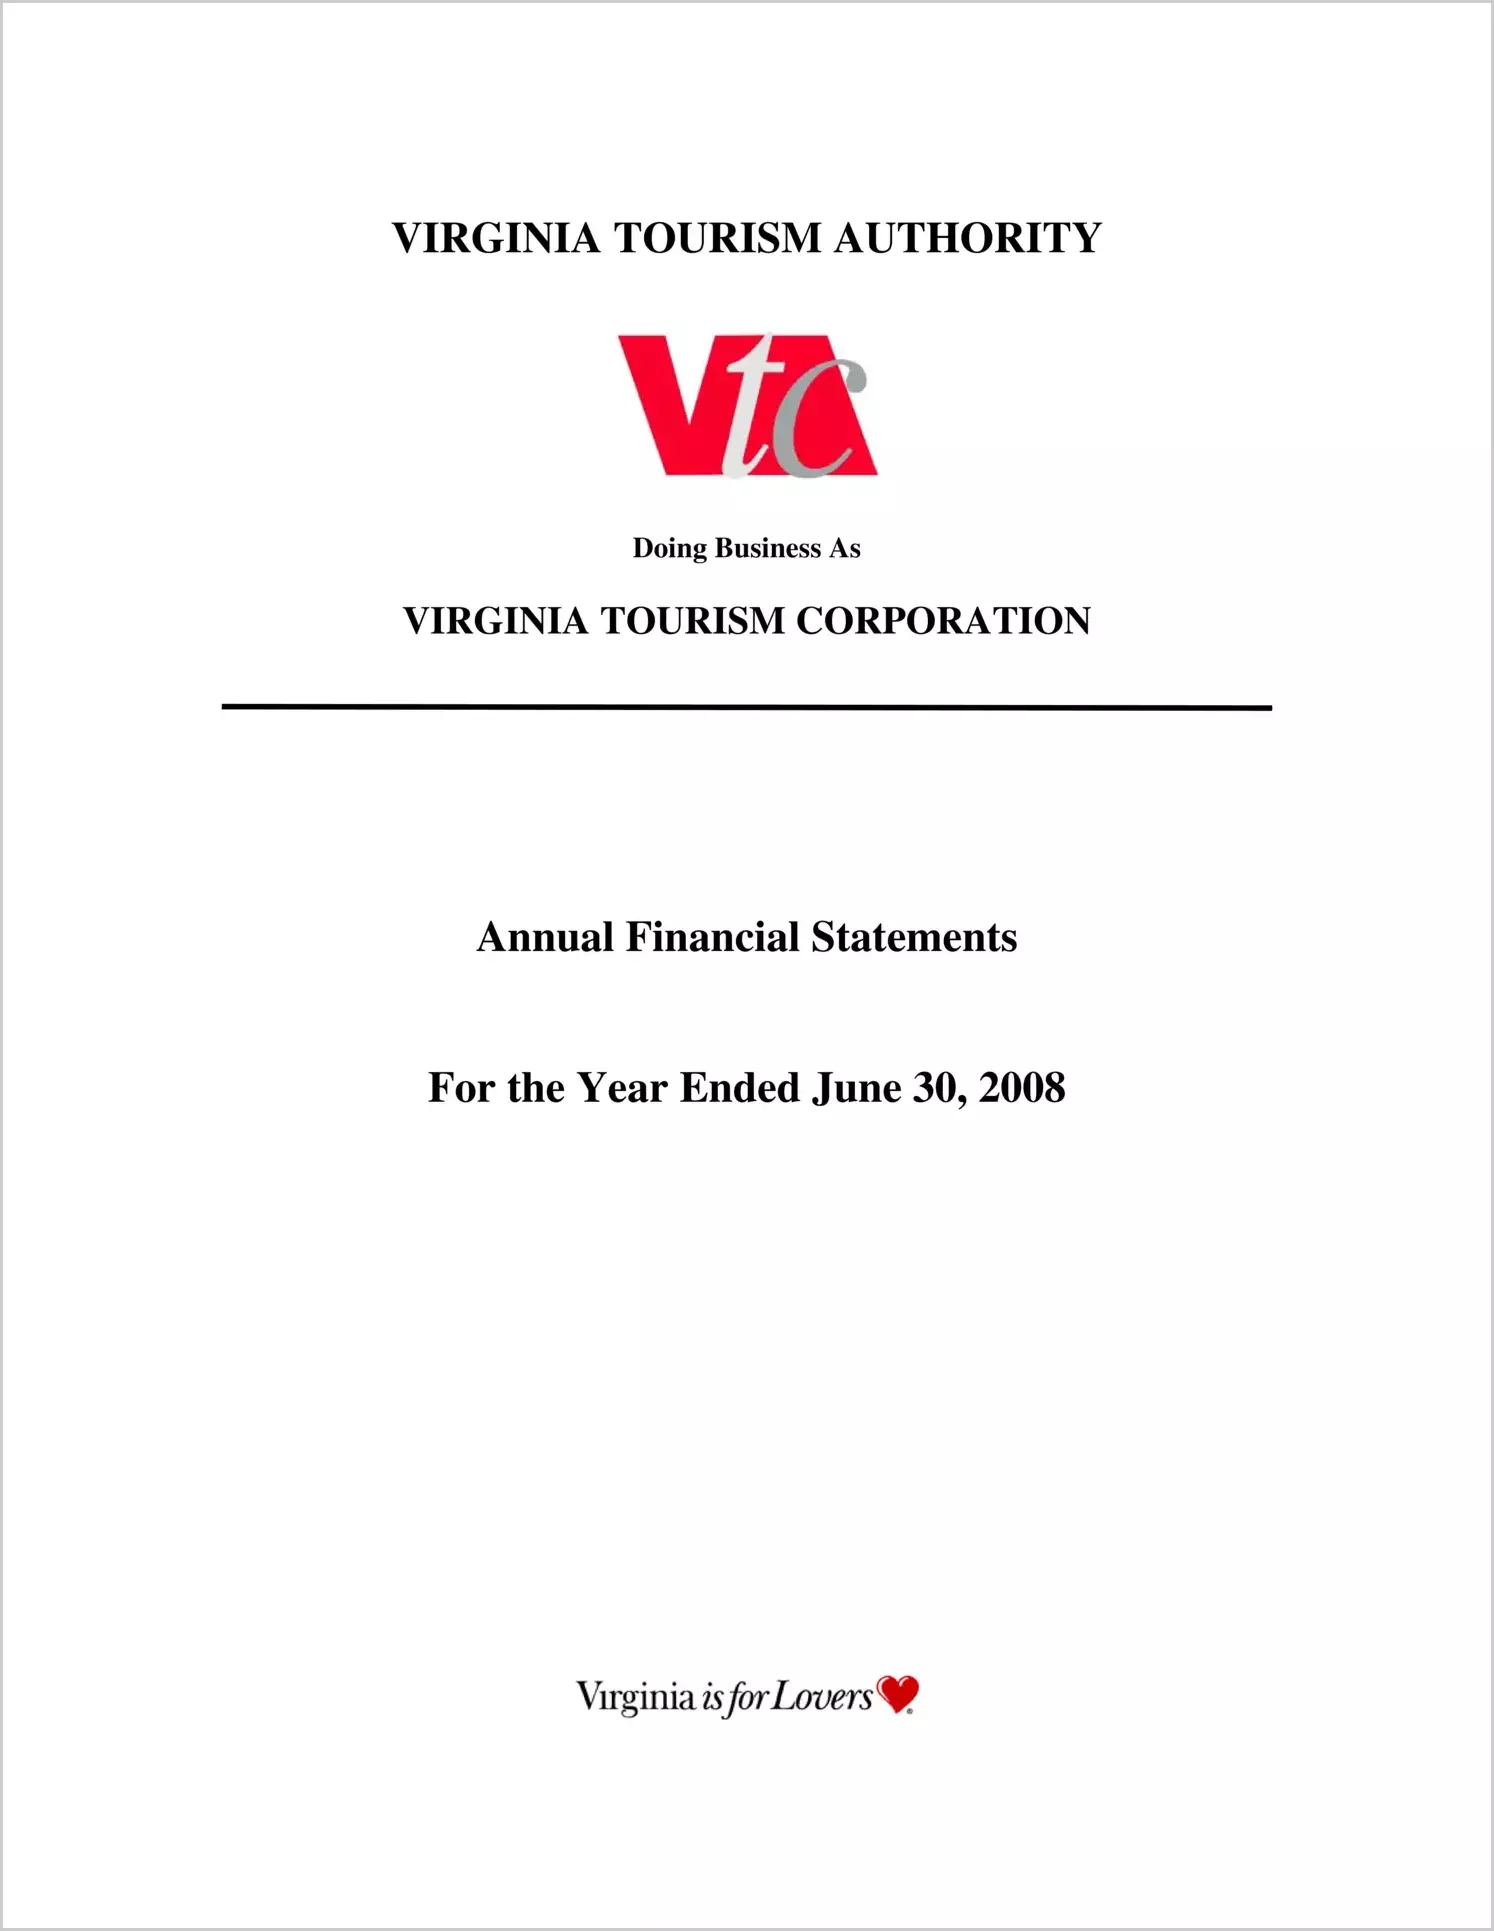 Virginia Tourism Authority Annual Financial Report for the year ended June 30, 2008